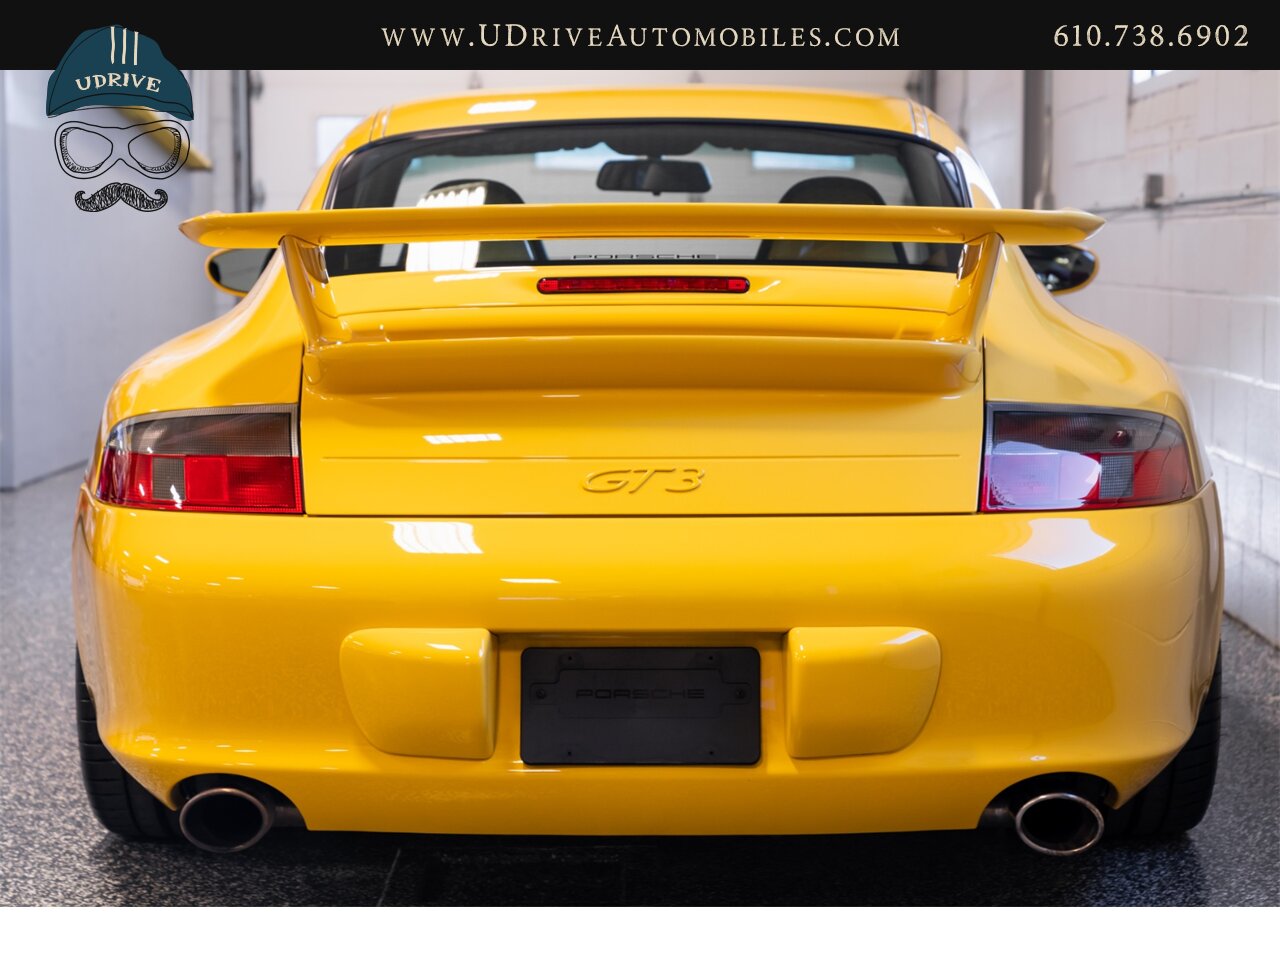 2005 Porsche 911 GT3 996 Speed Yellow Sport Seats Pntd Hardbacks  Pntd Console Deviating Stitch Yellow Accents Throughout - Photo 24 - West Chester, PA 19382